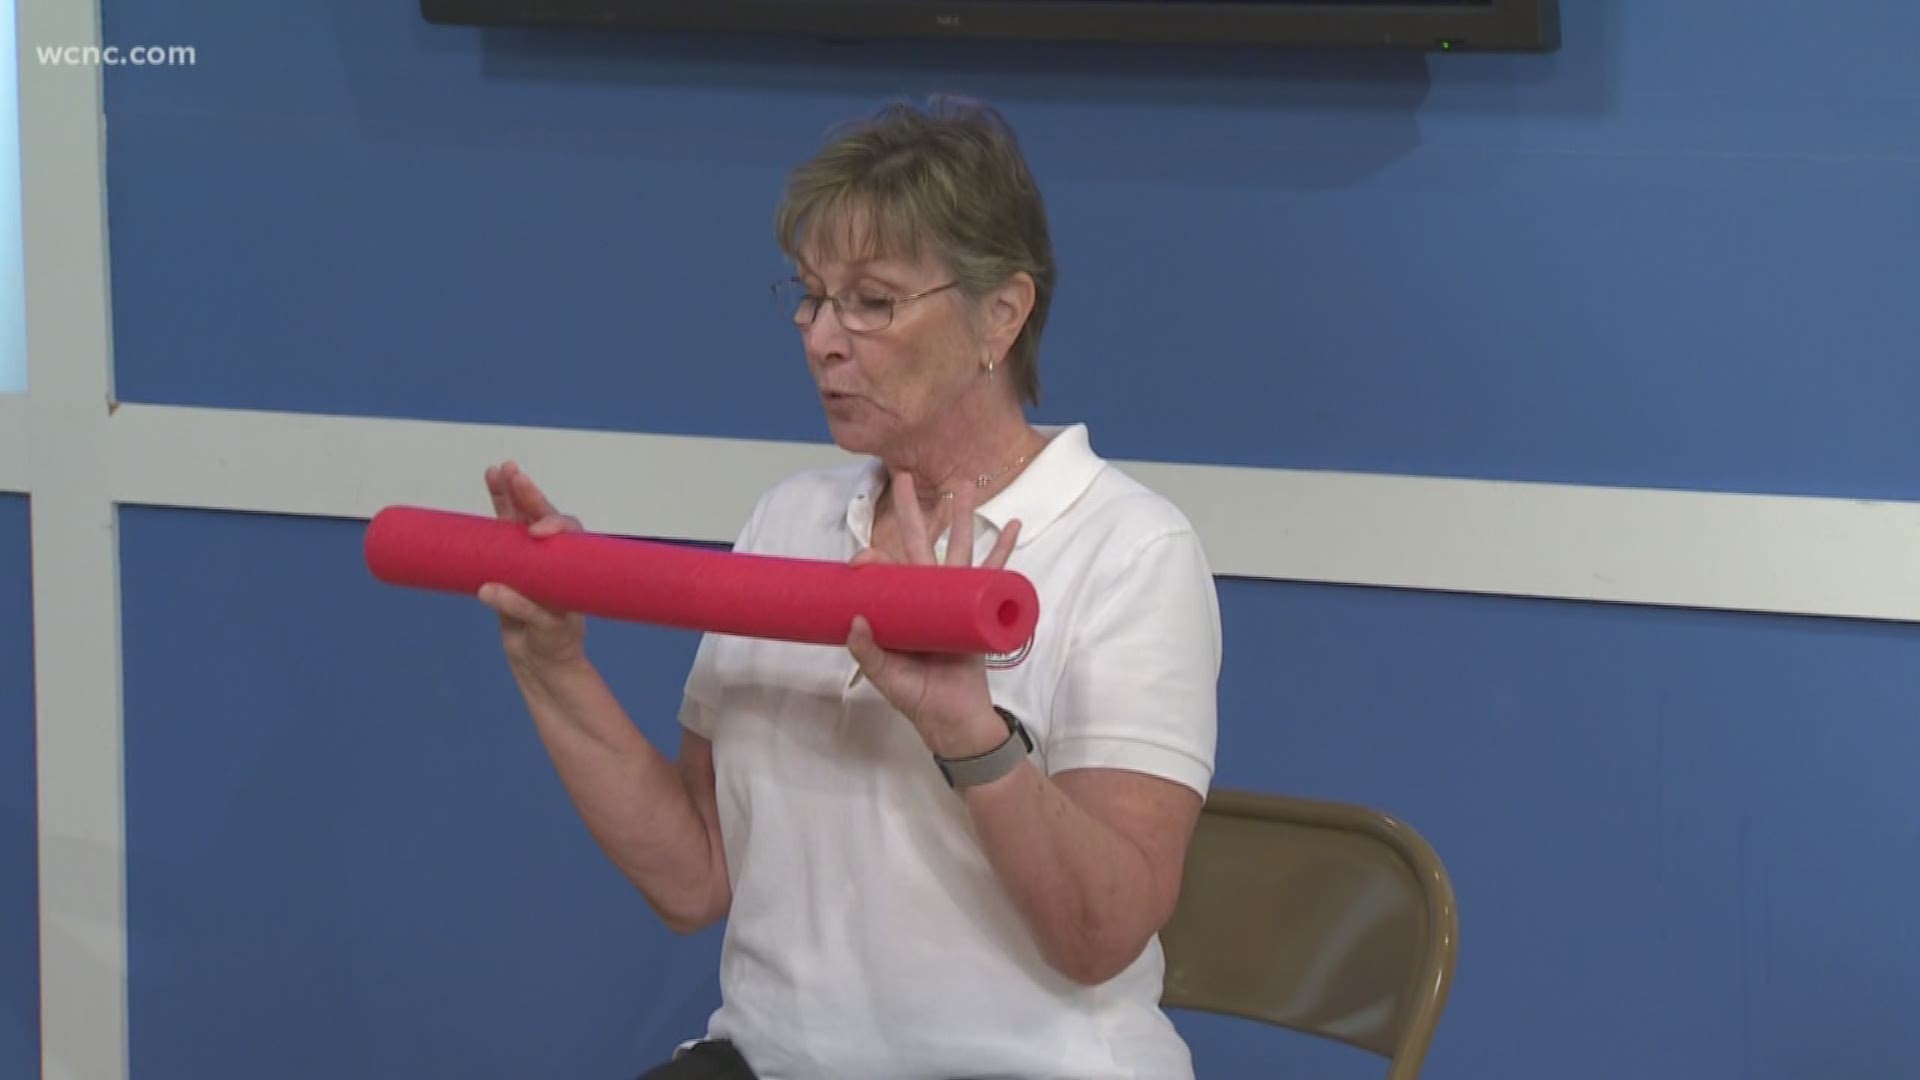 Senior fitness trainer Kathy Joy shows us how to get a great workout using only a foam pool noodle.